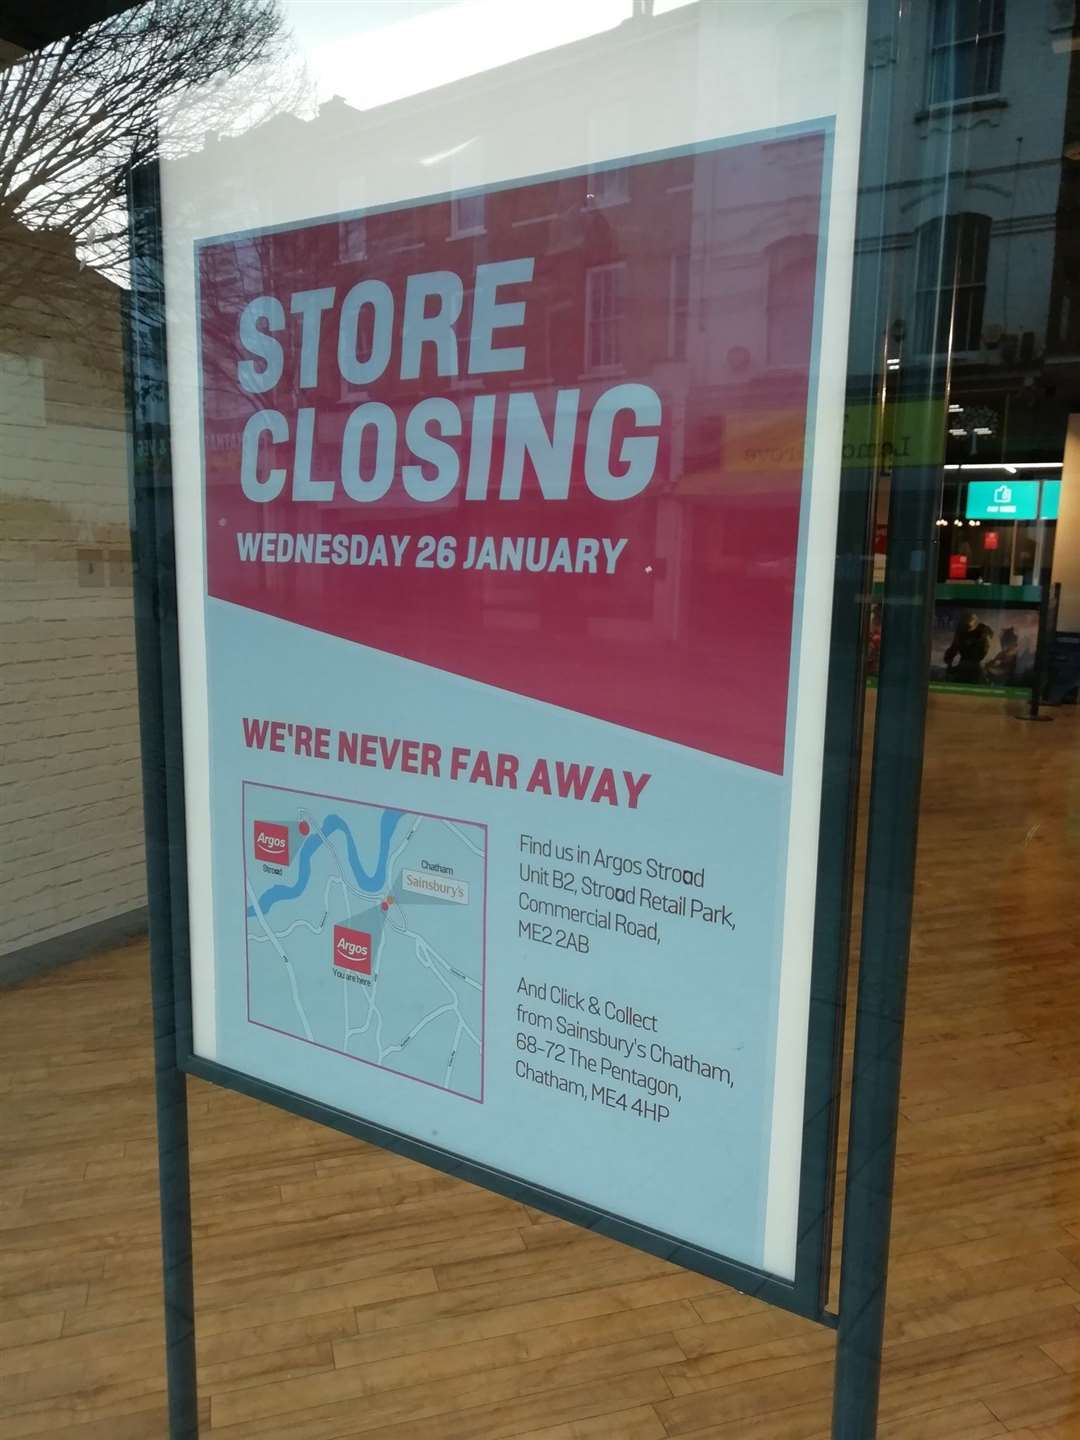 Stores around Kent have also been closing including the Chatham branch